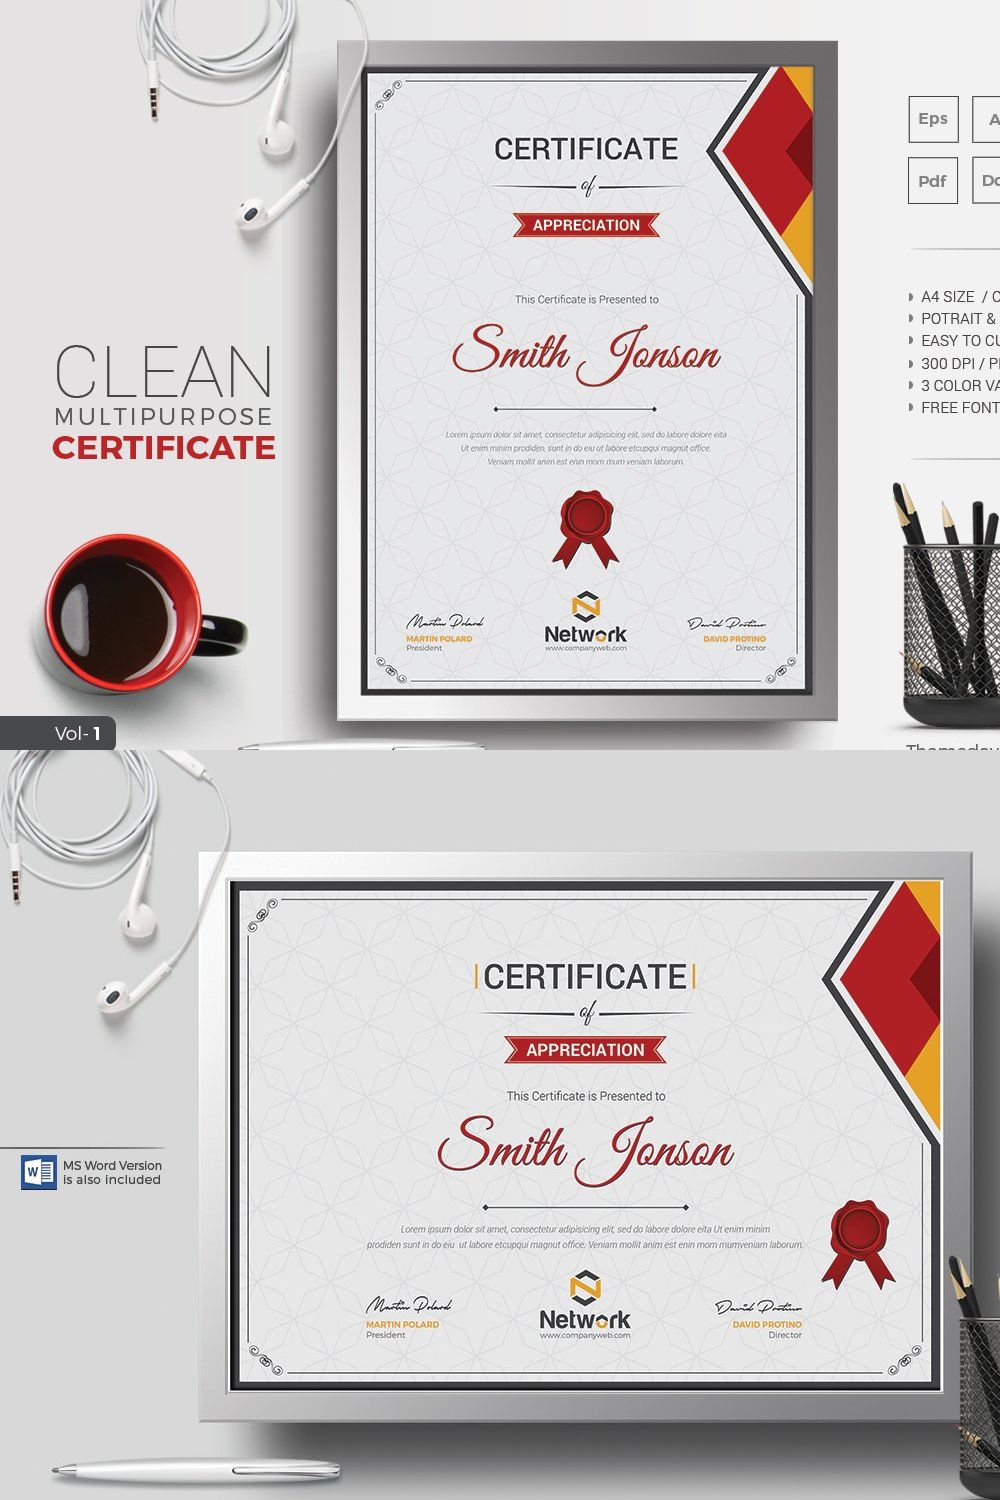 Certificate pinterest preview image.